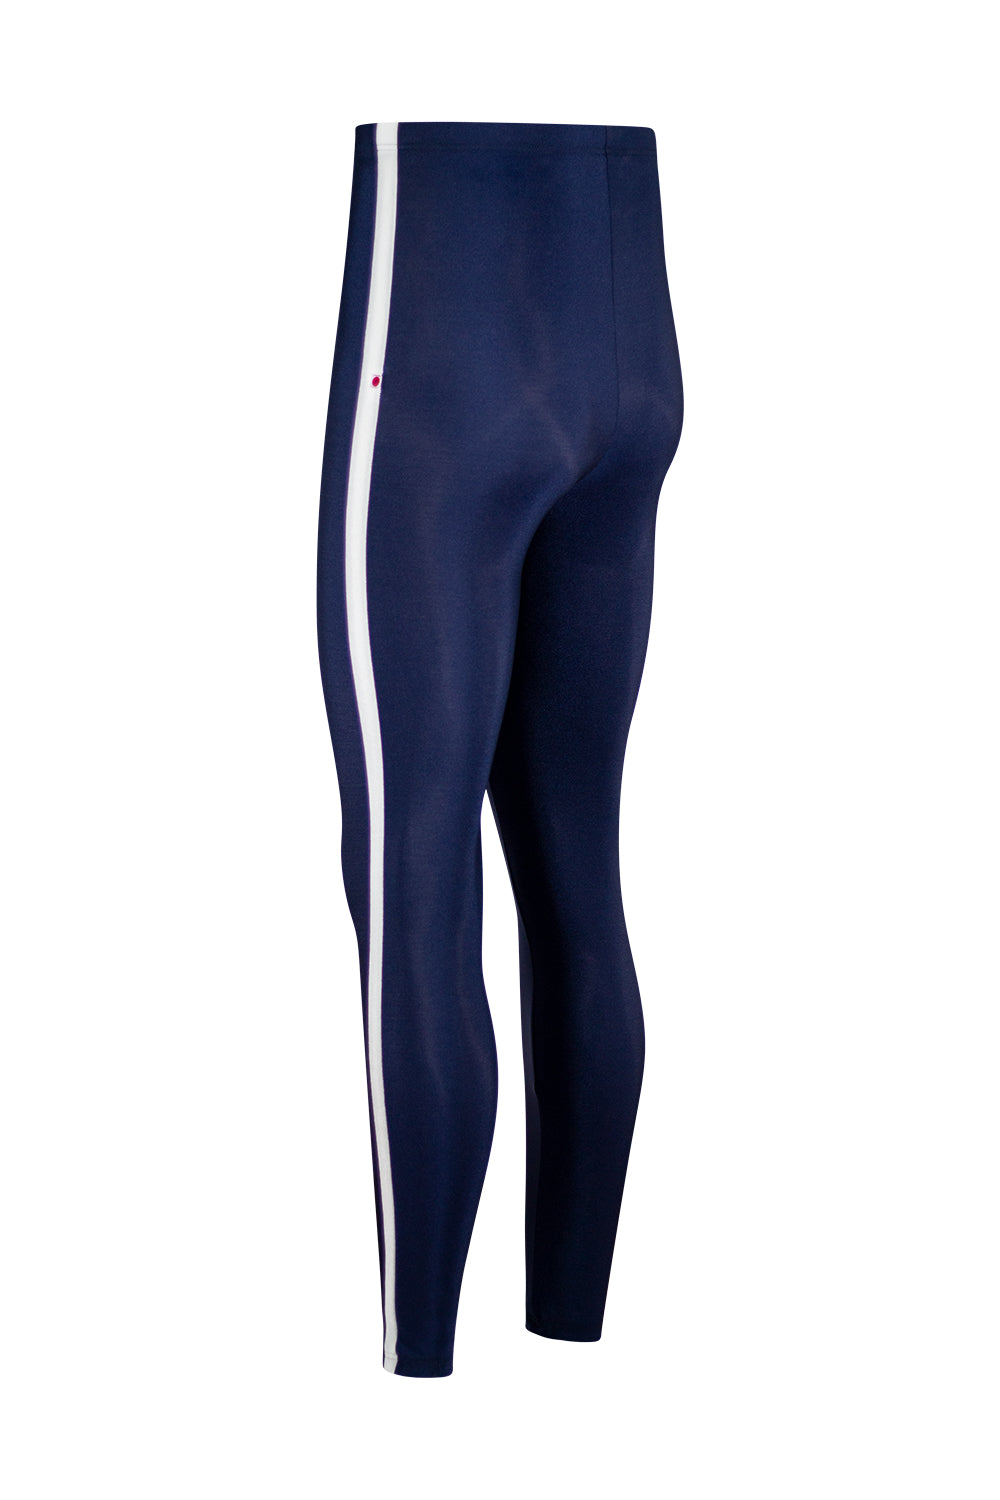 Cedric tights in N-Dark Blue body color with V-White side stripe and High-Waist 